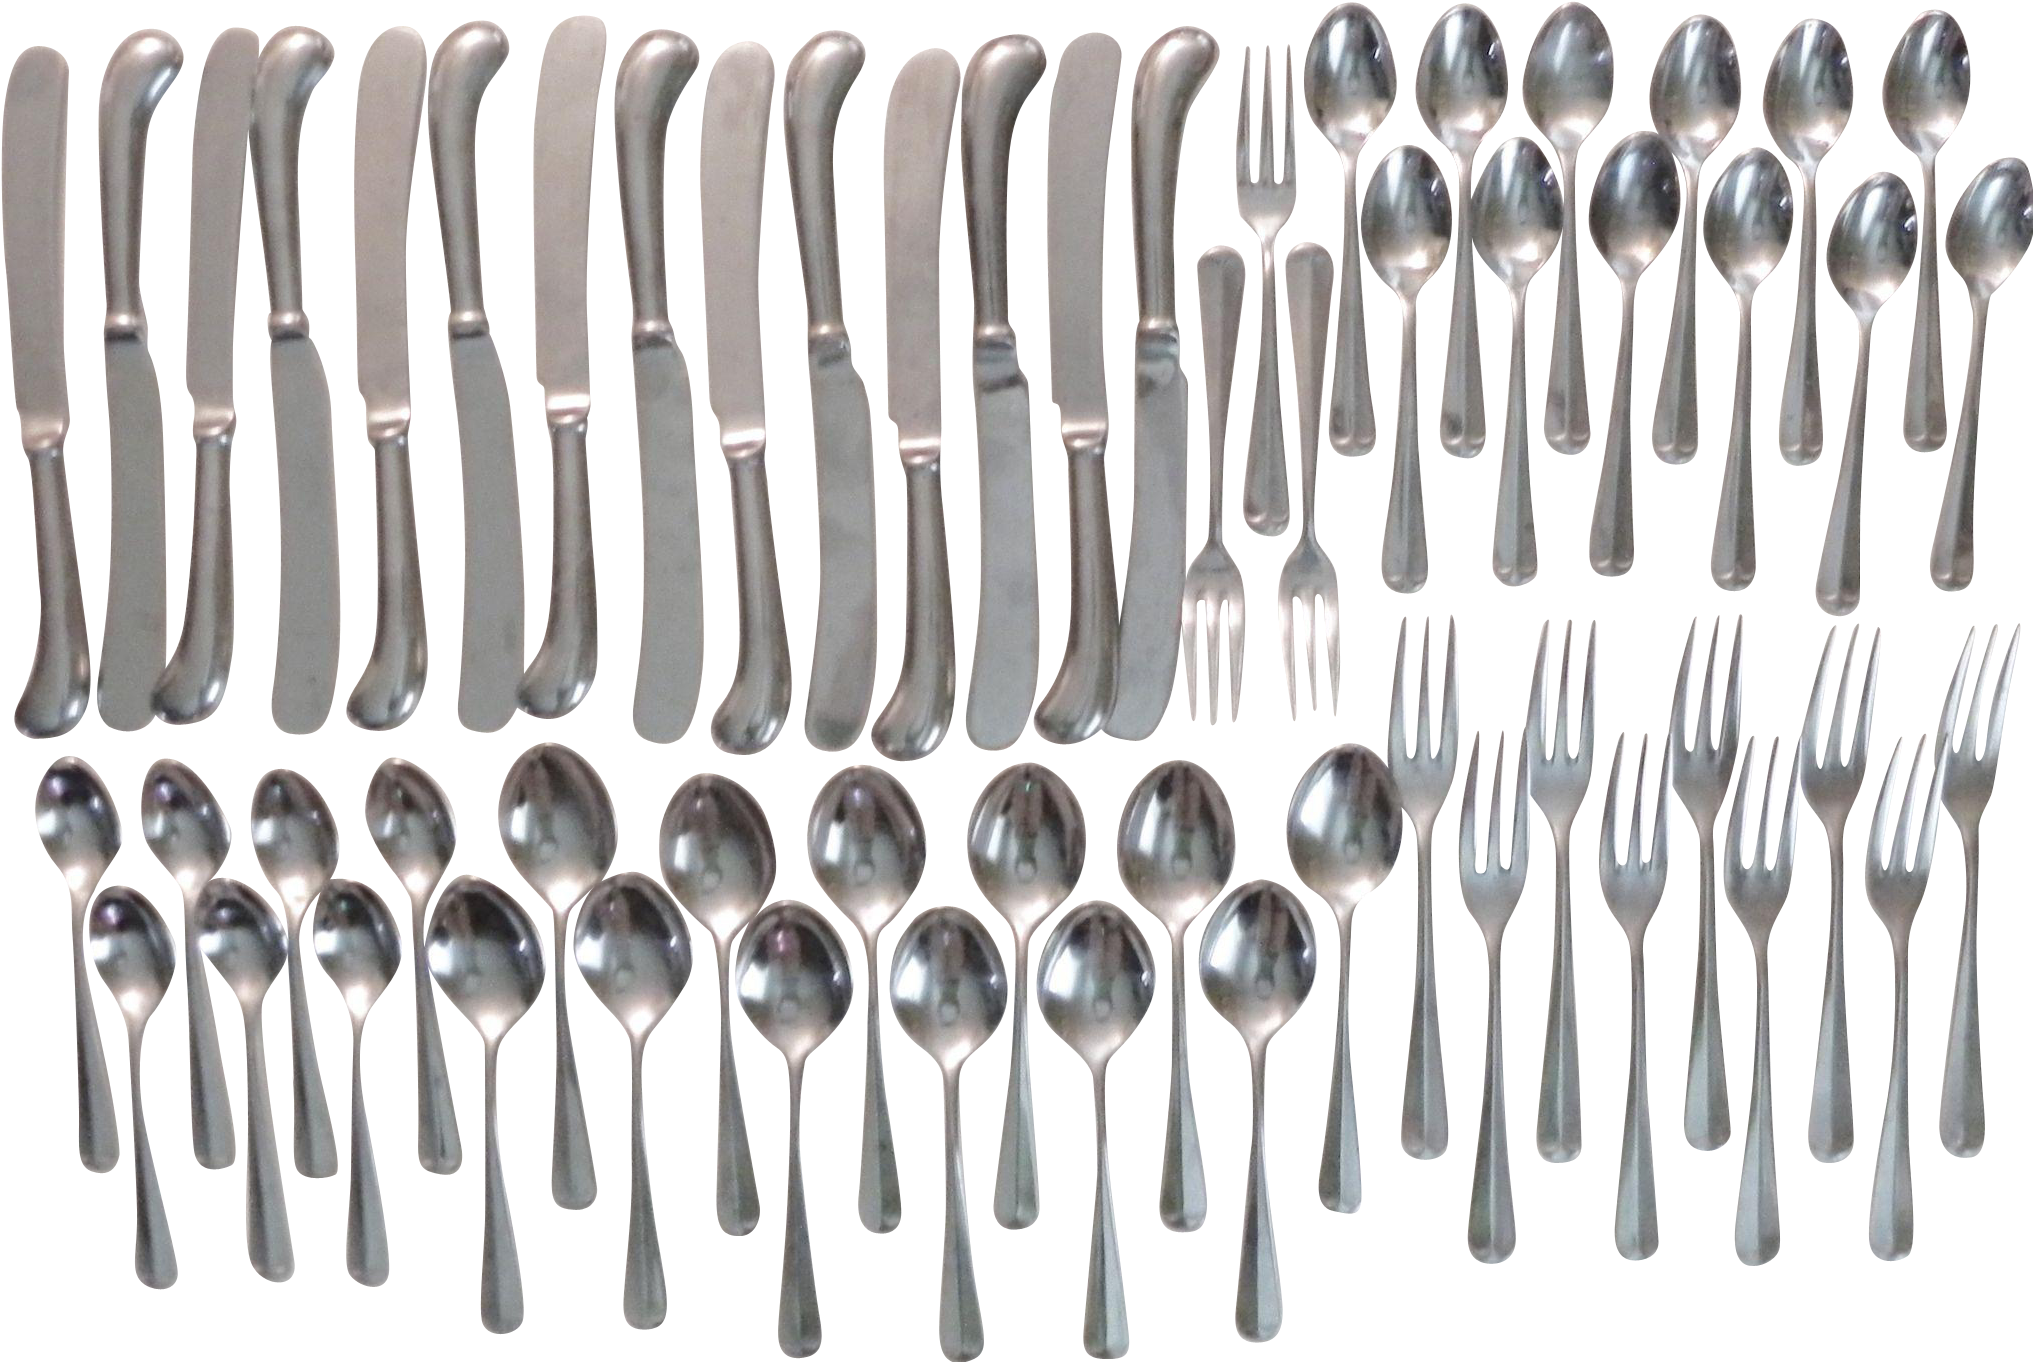 A Group Of Silverware On A Black Background